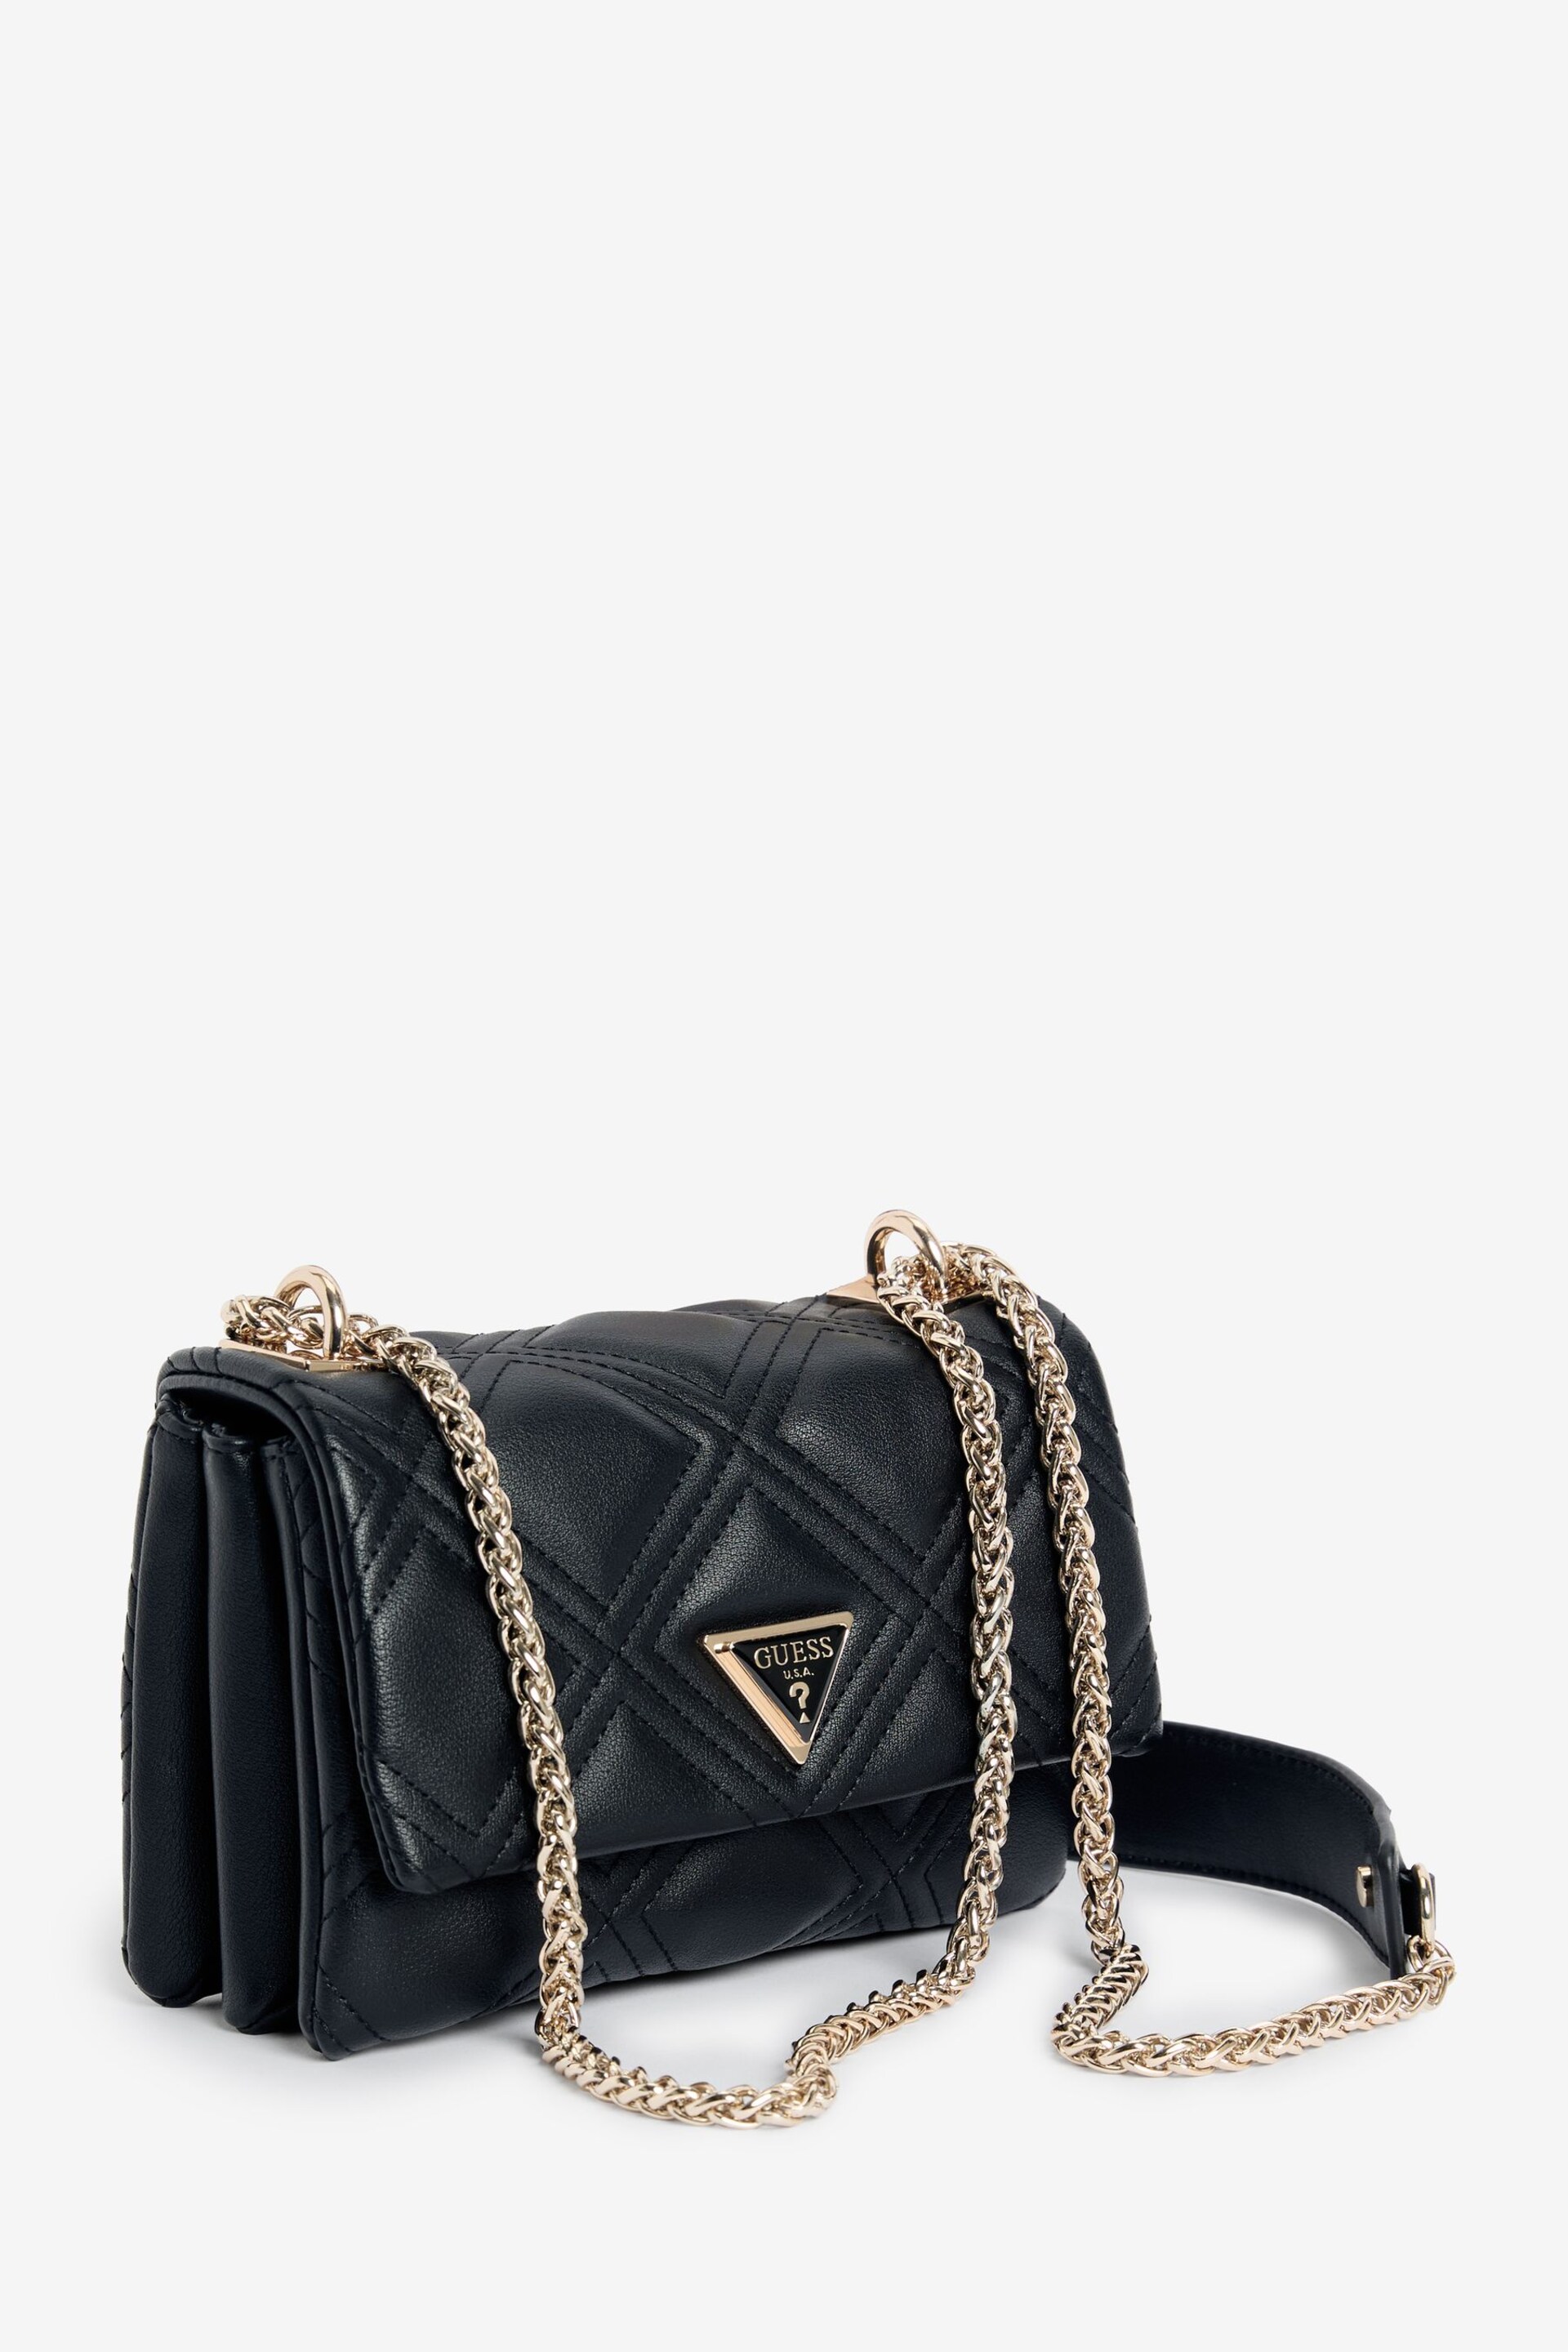 GUESS Black Deesa Quilted Convertible Cross-Body Flap Bag - Image 1 of 5